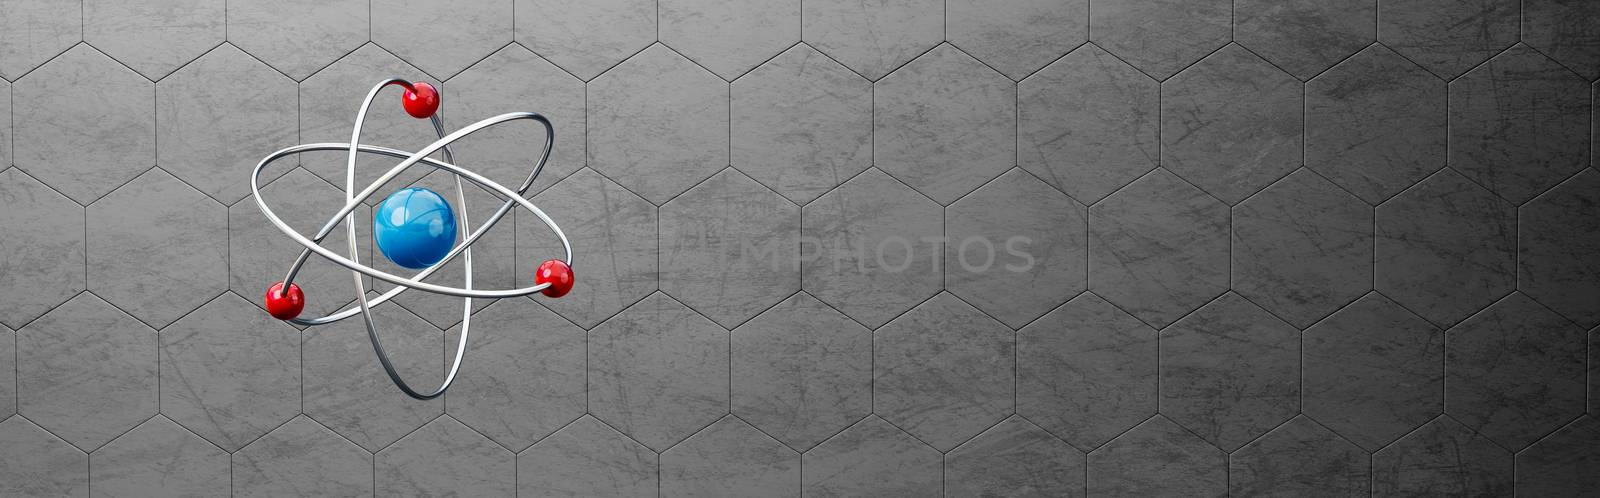 Atom Symbol Structure on Gray Background by make